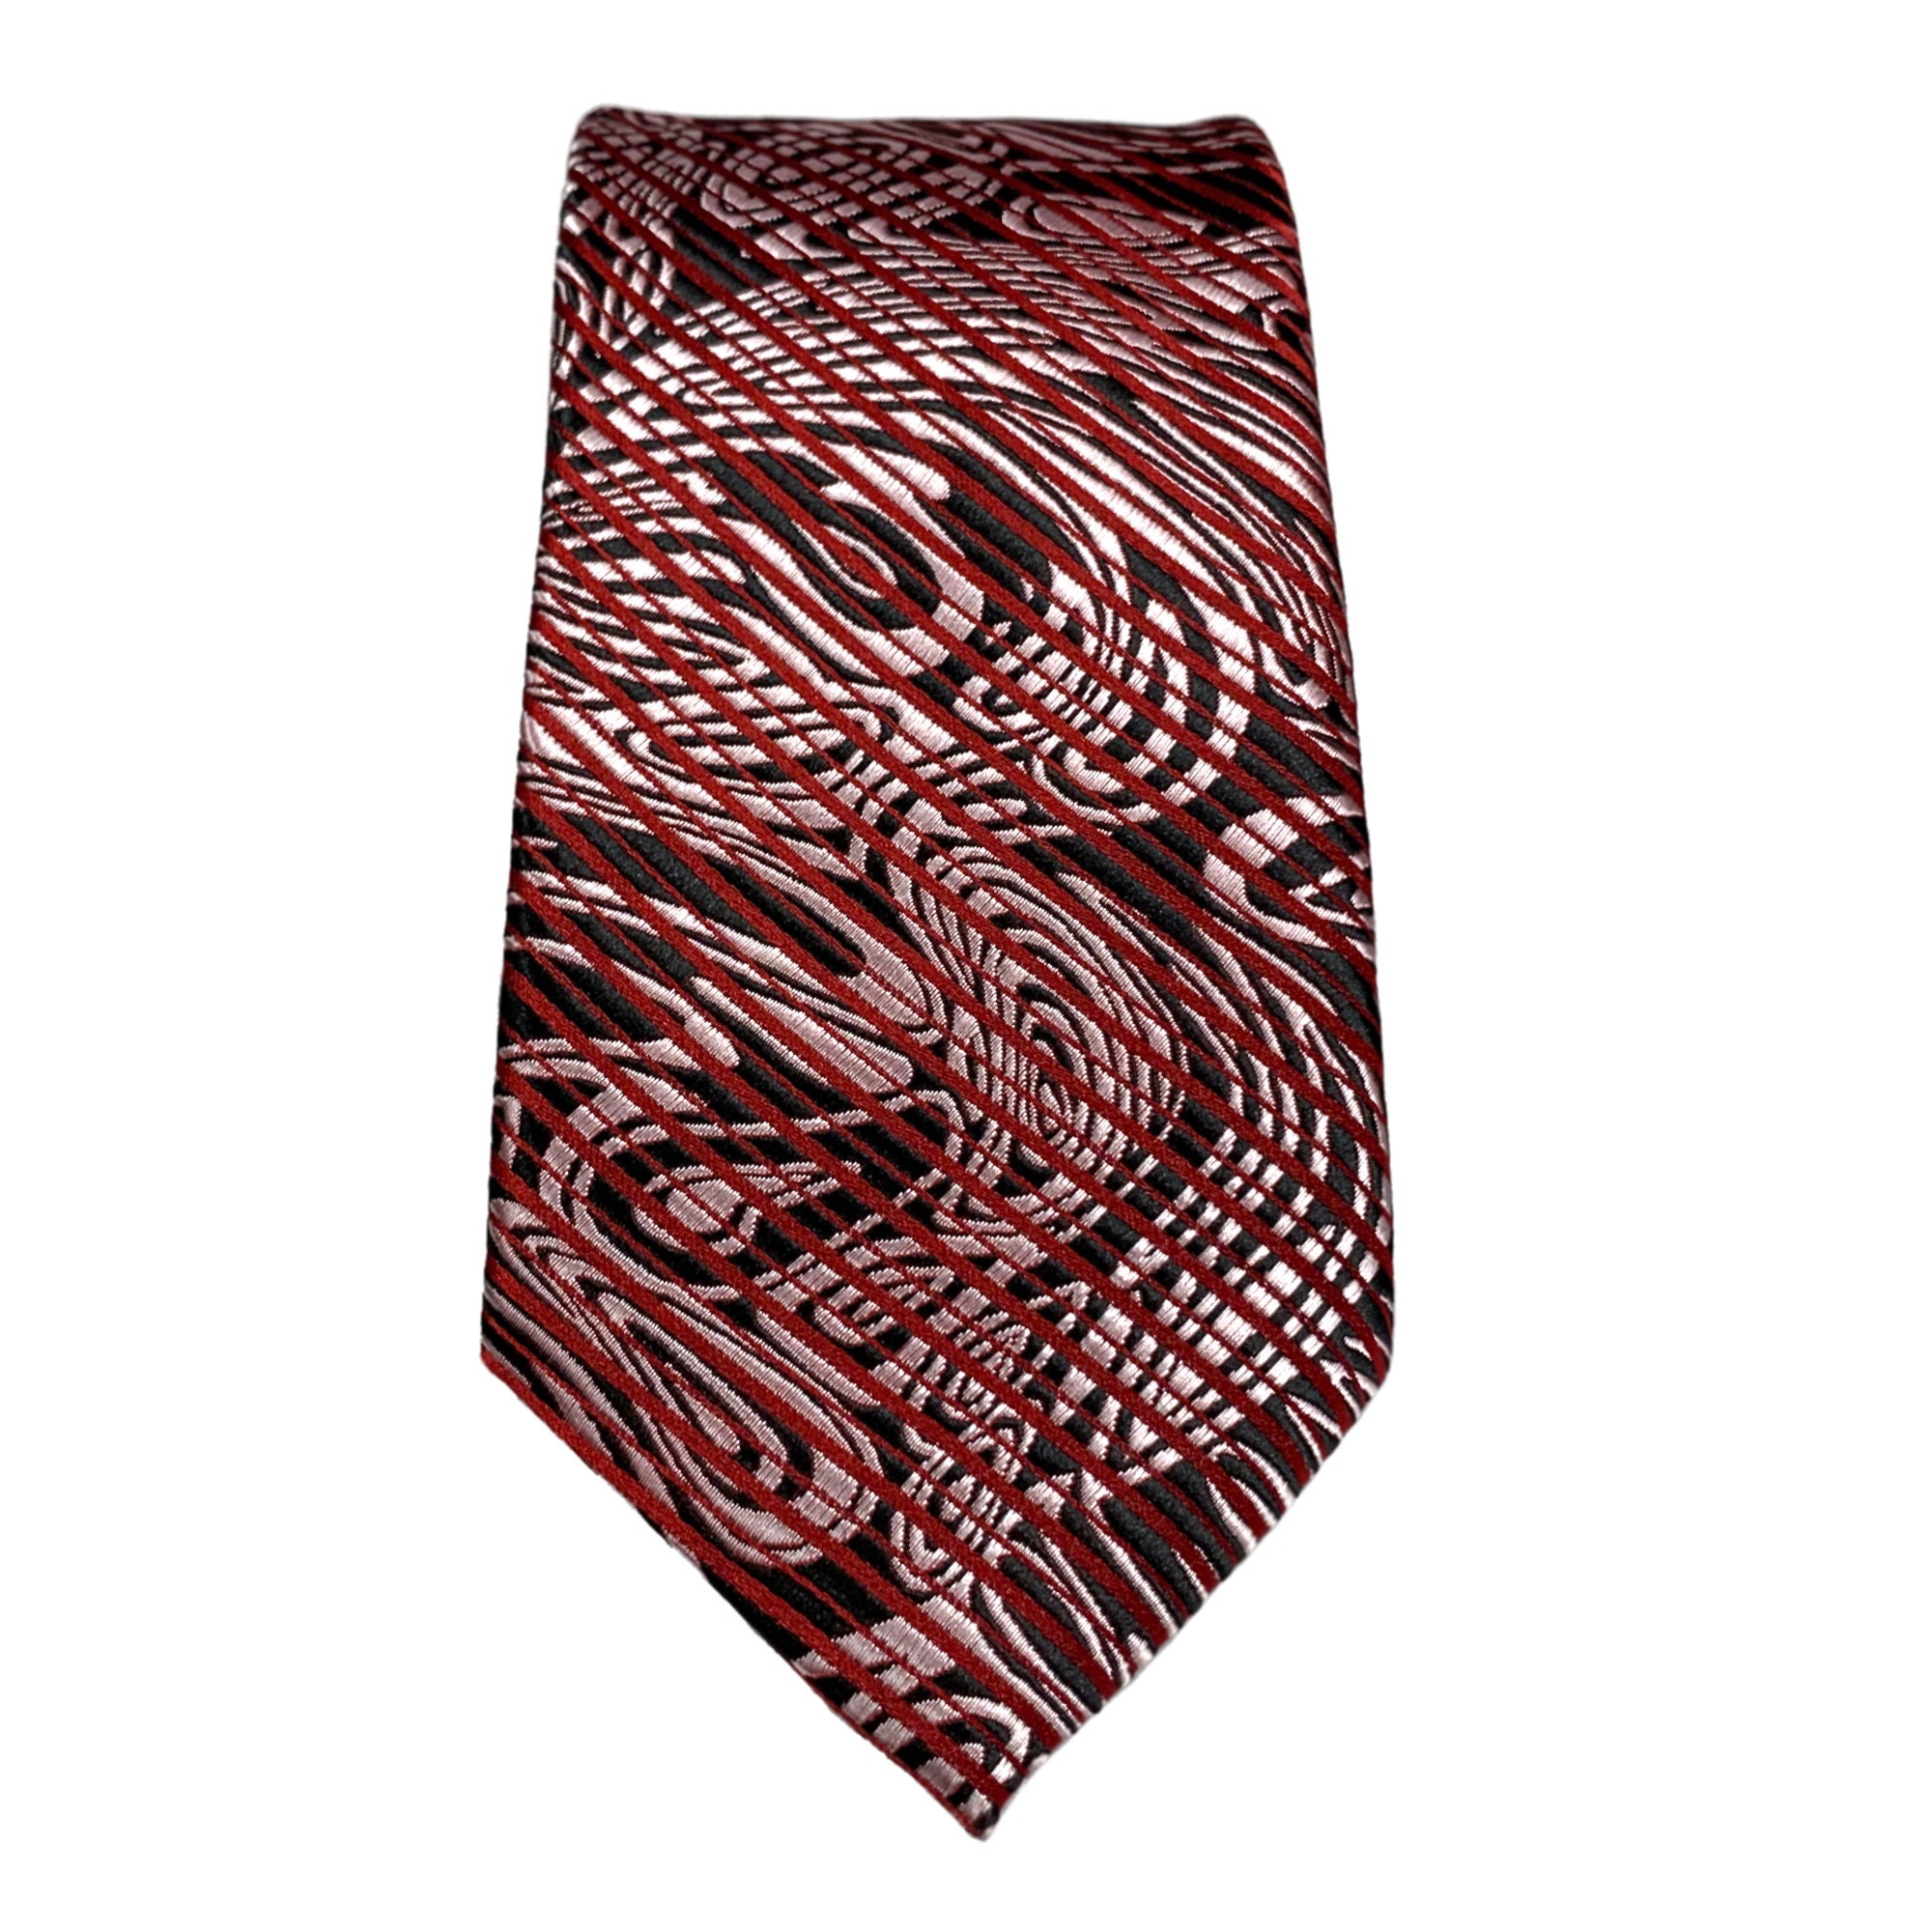 Burgundy and Pink Wave Pattern Diagonal Striped Tie 2.95 - Etsy